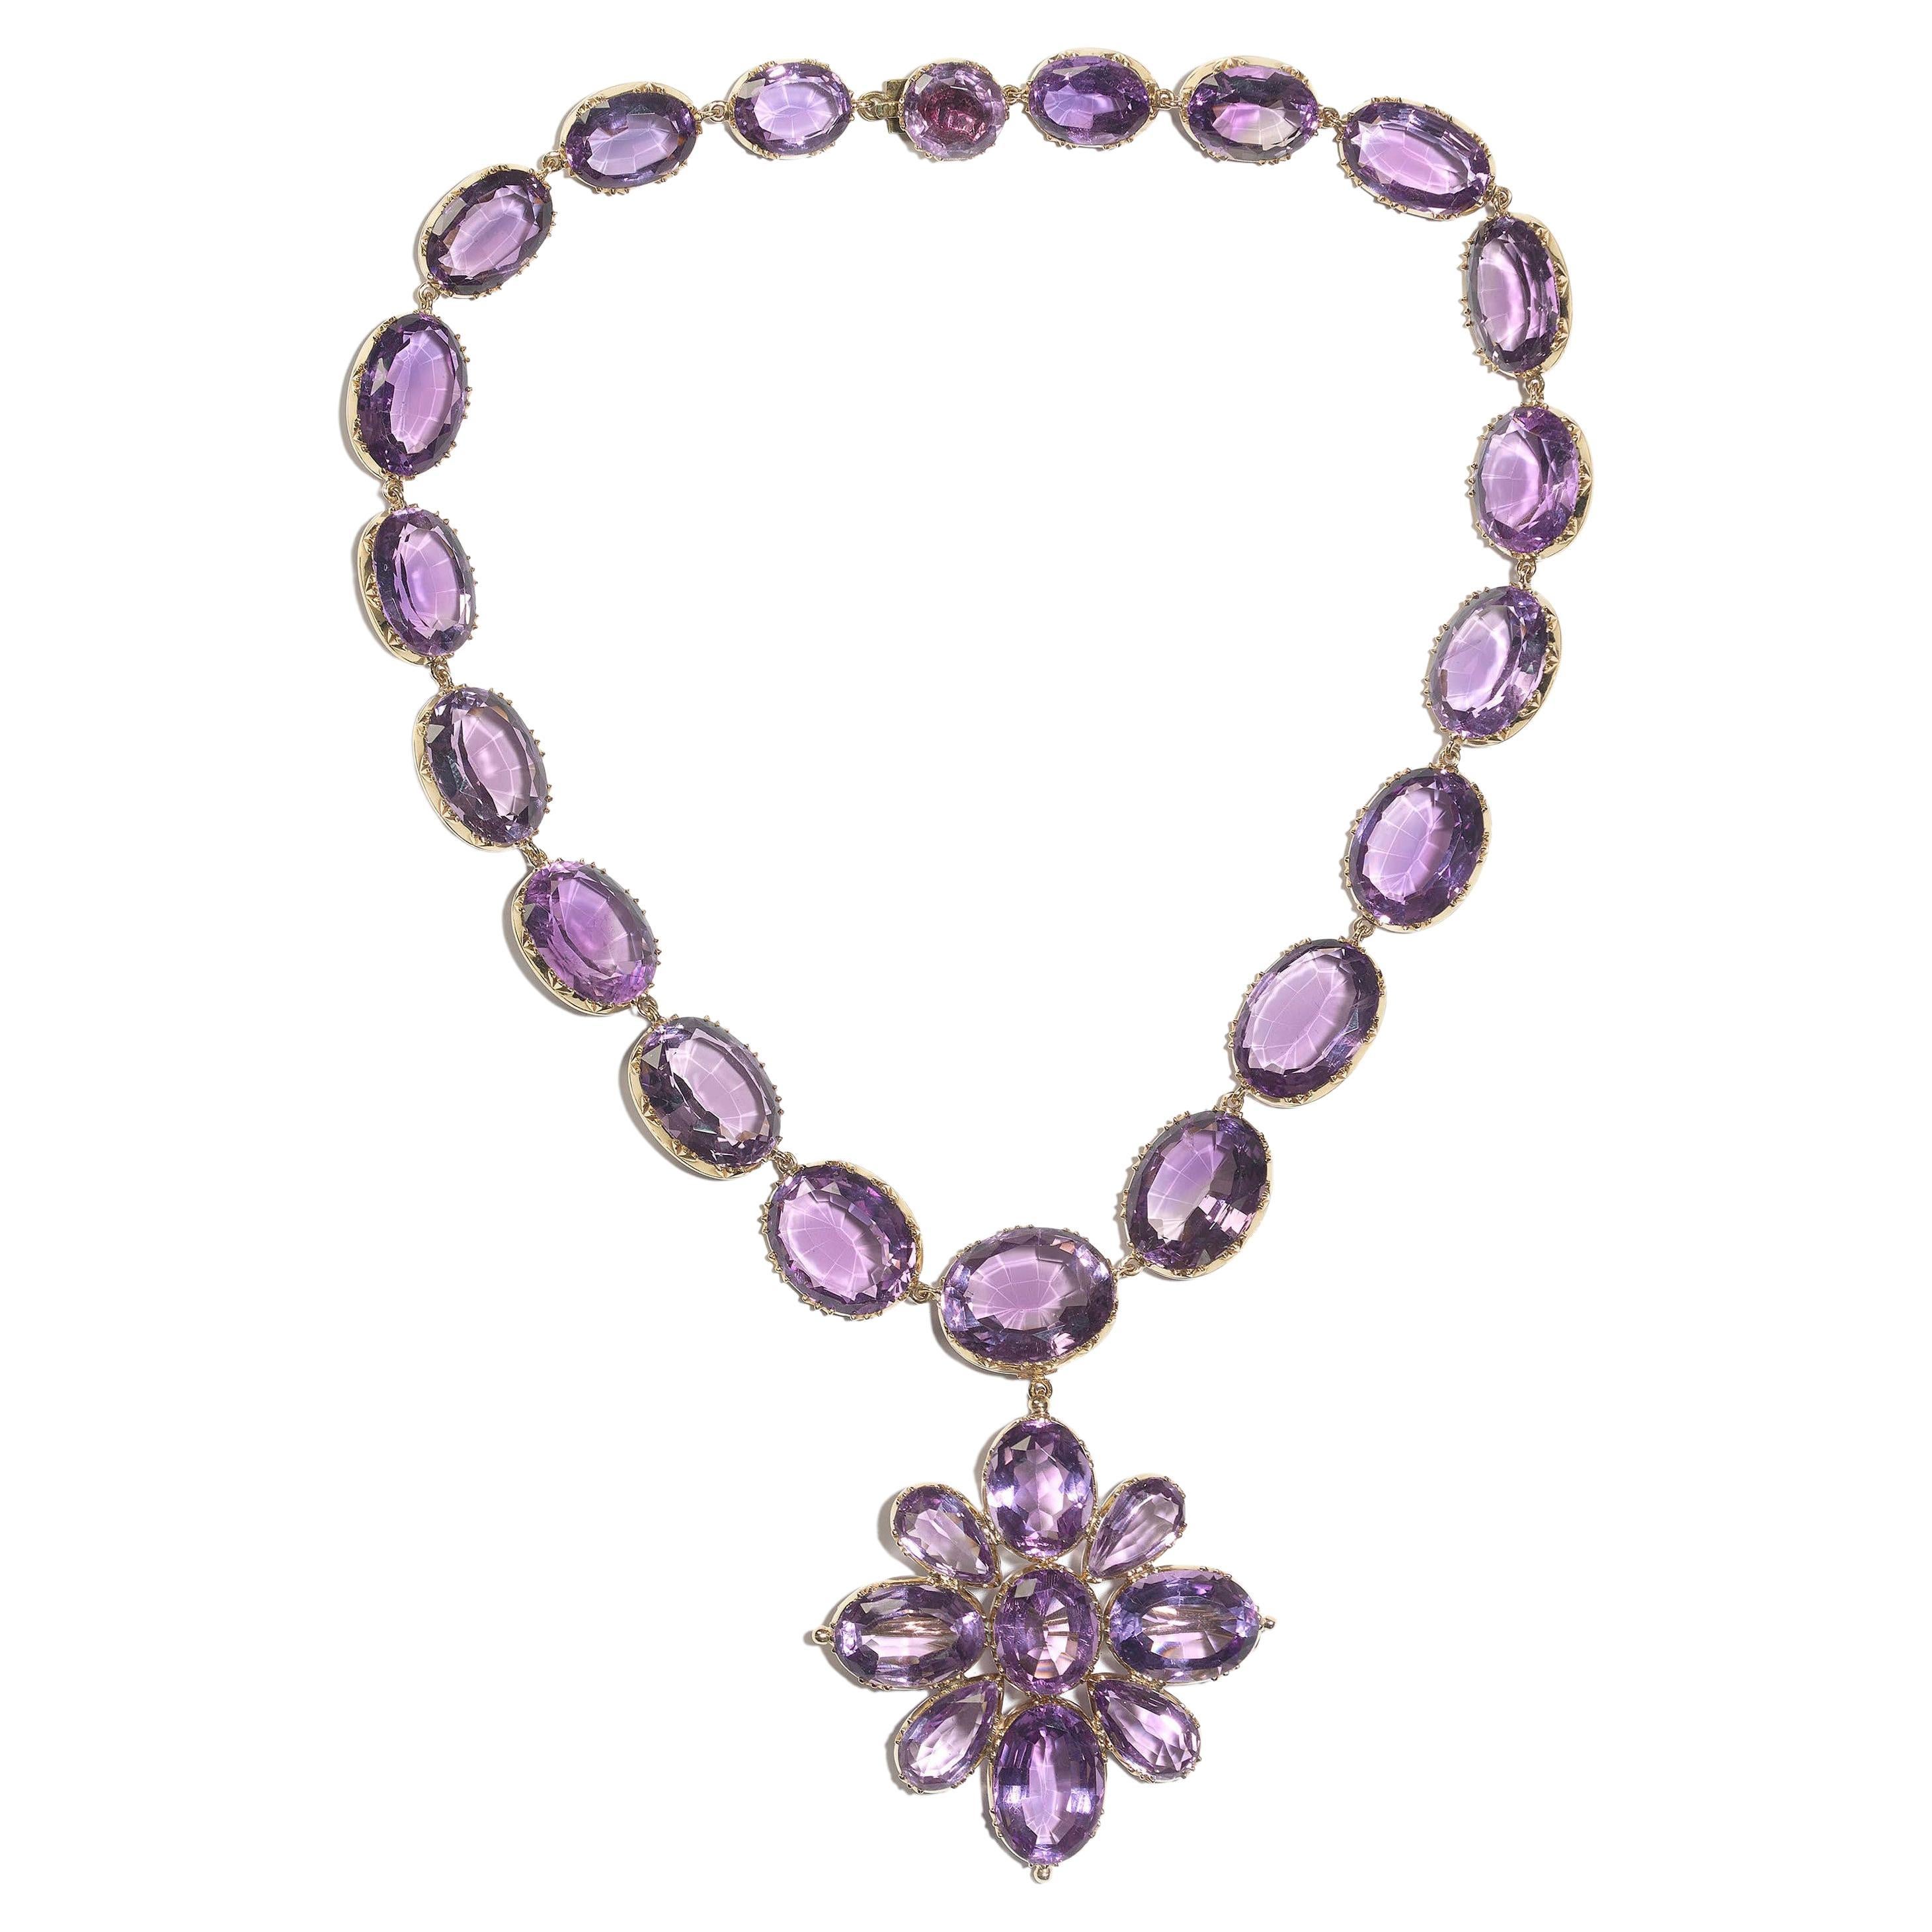 Antique Amethyst and Gold Riviére Necklace and Cross Pendant, Circa 1880